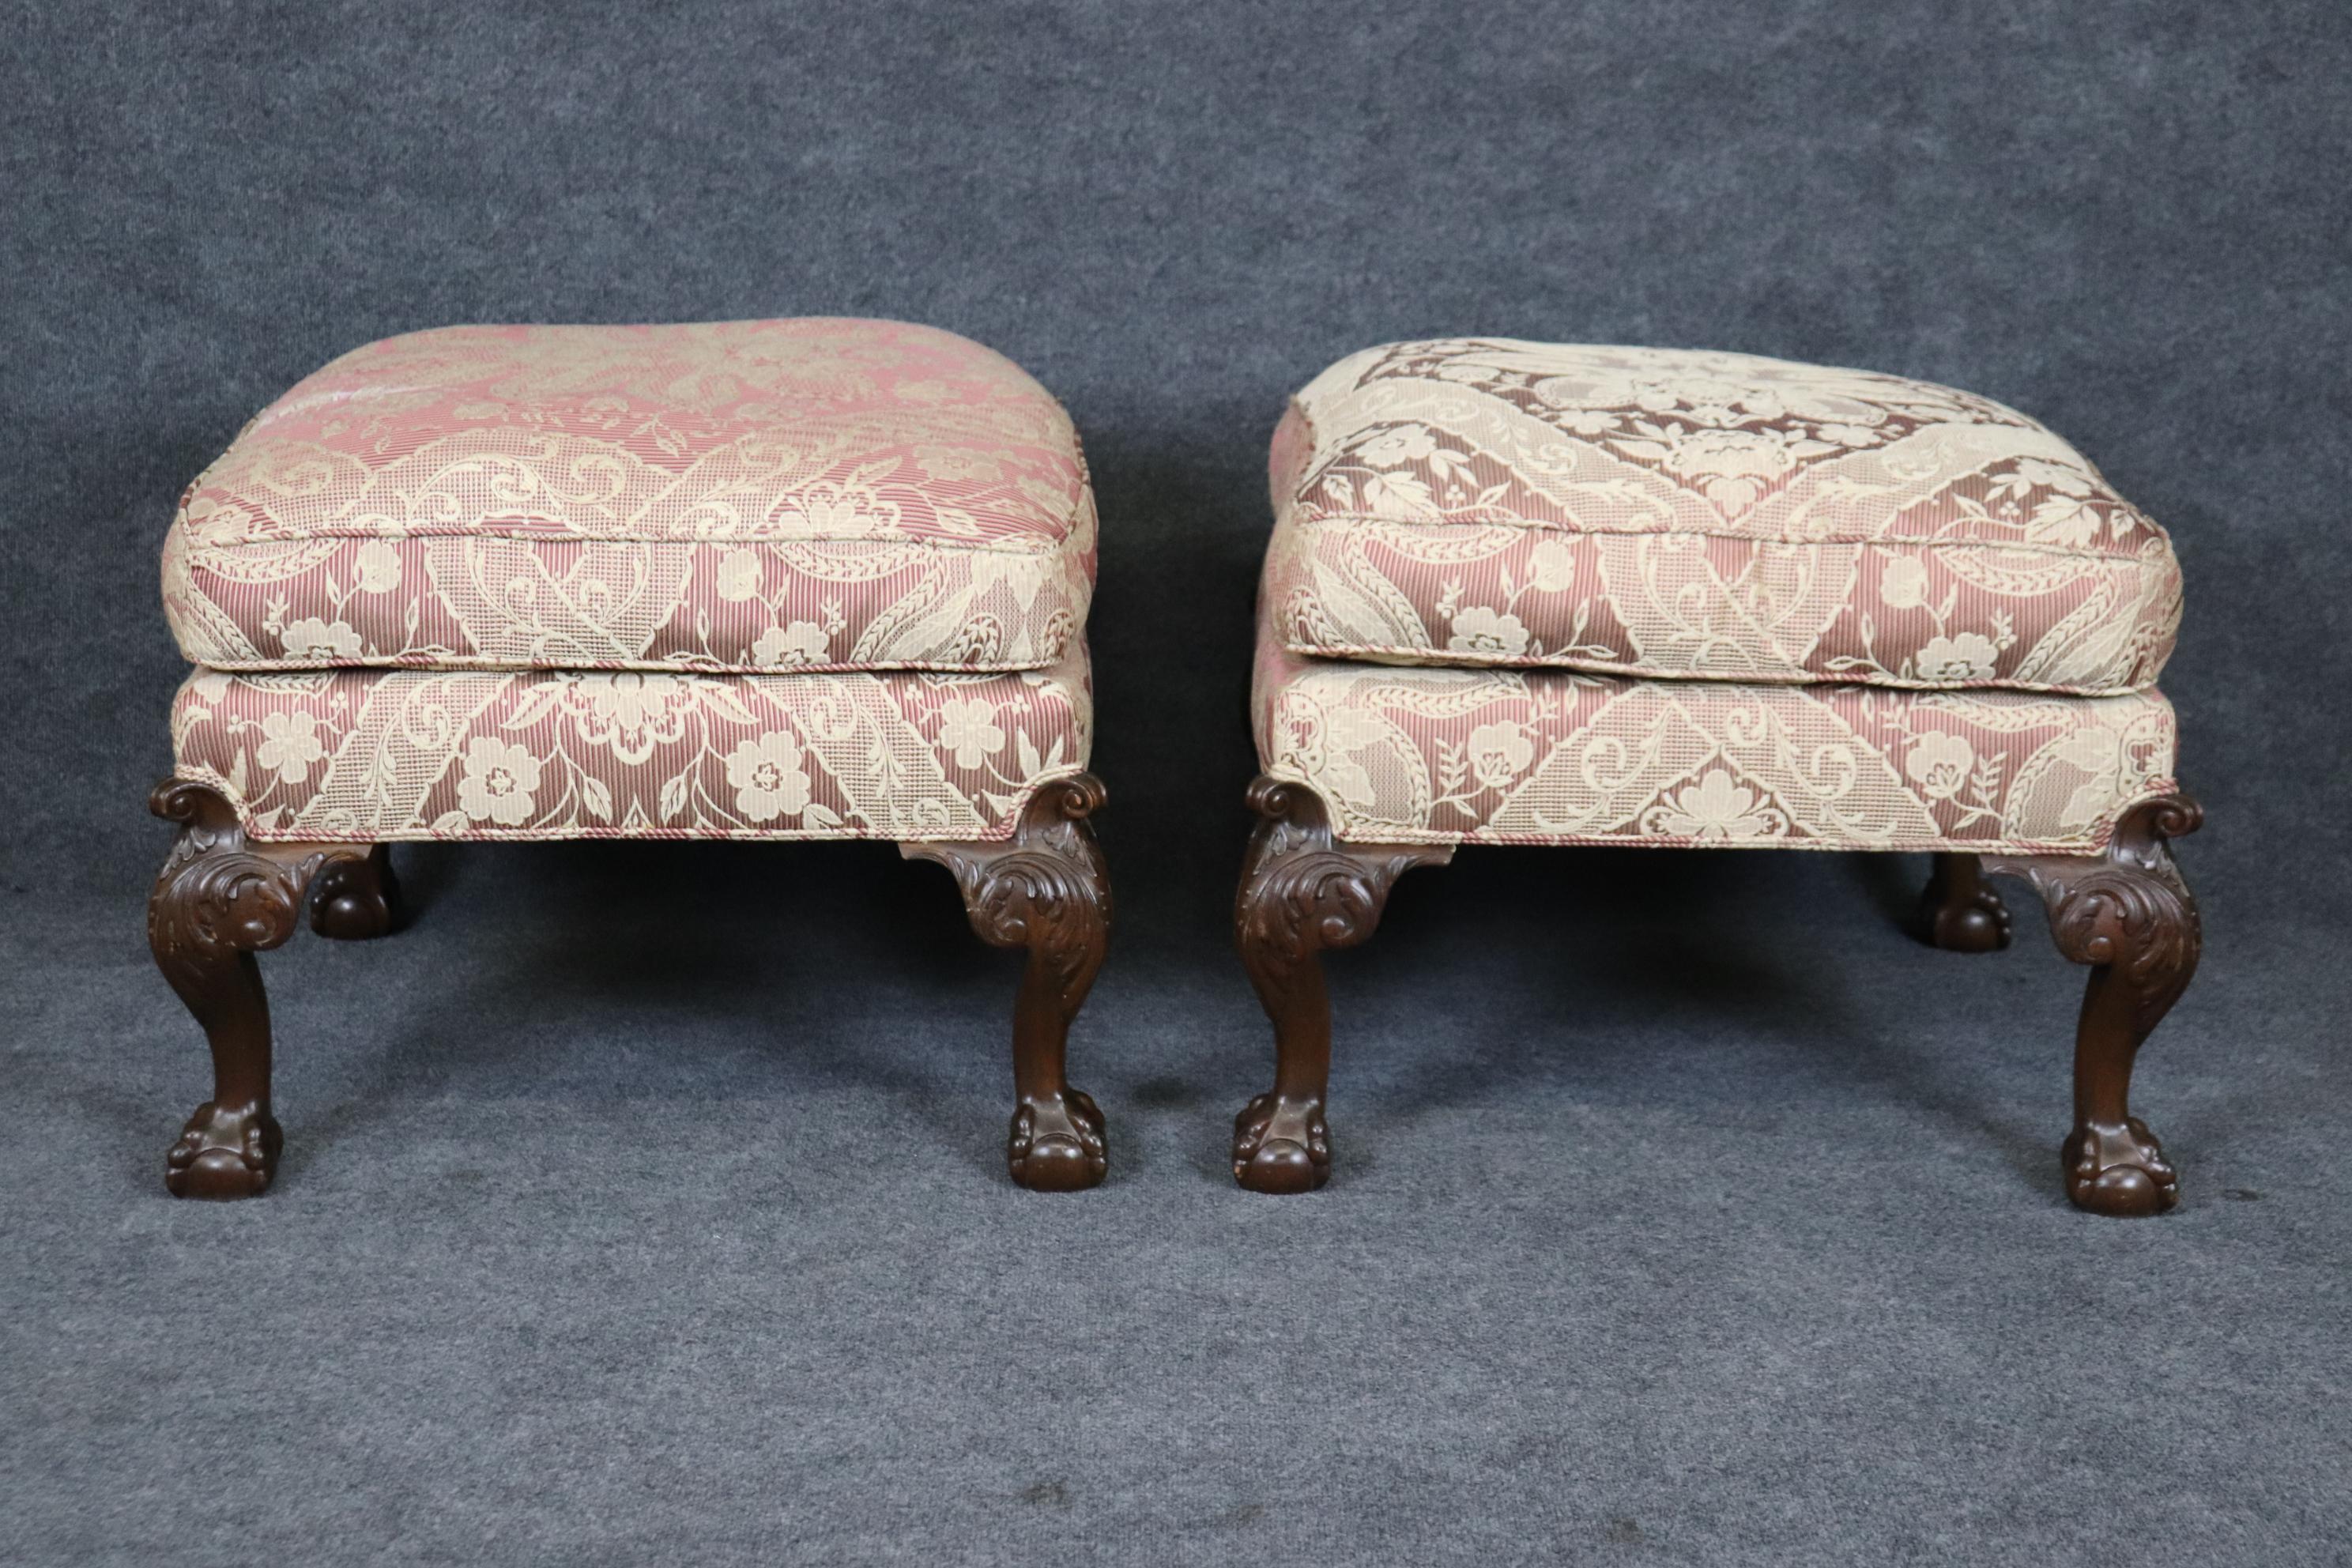 These gorgeous stools are absolutely gorgeous and feature incredible carved ball and claw feet and acanthus leaves on the leaves. The upholstery is not symetrical but is well done and in good used condition. There may be signs of use such as stains